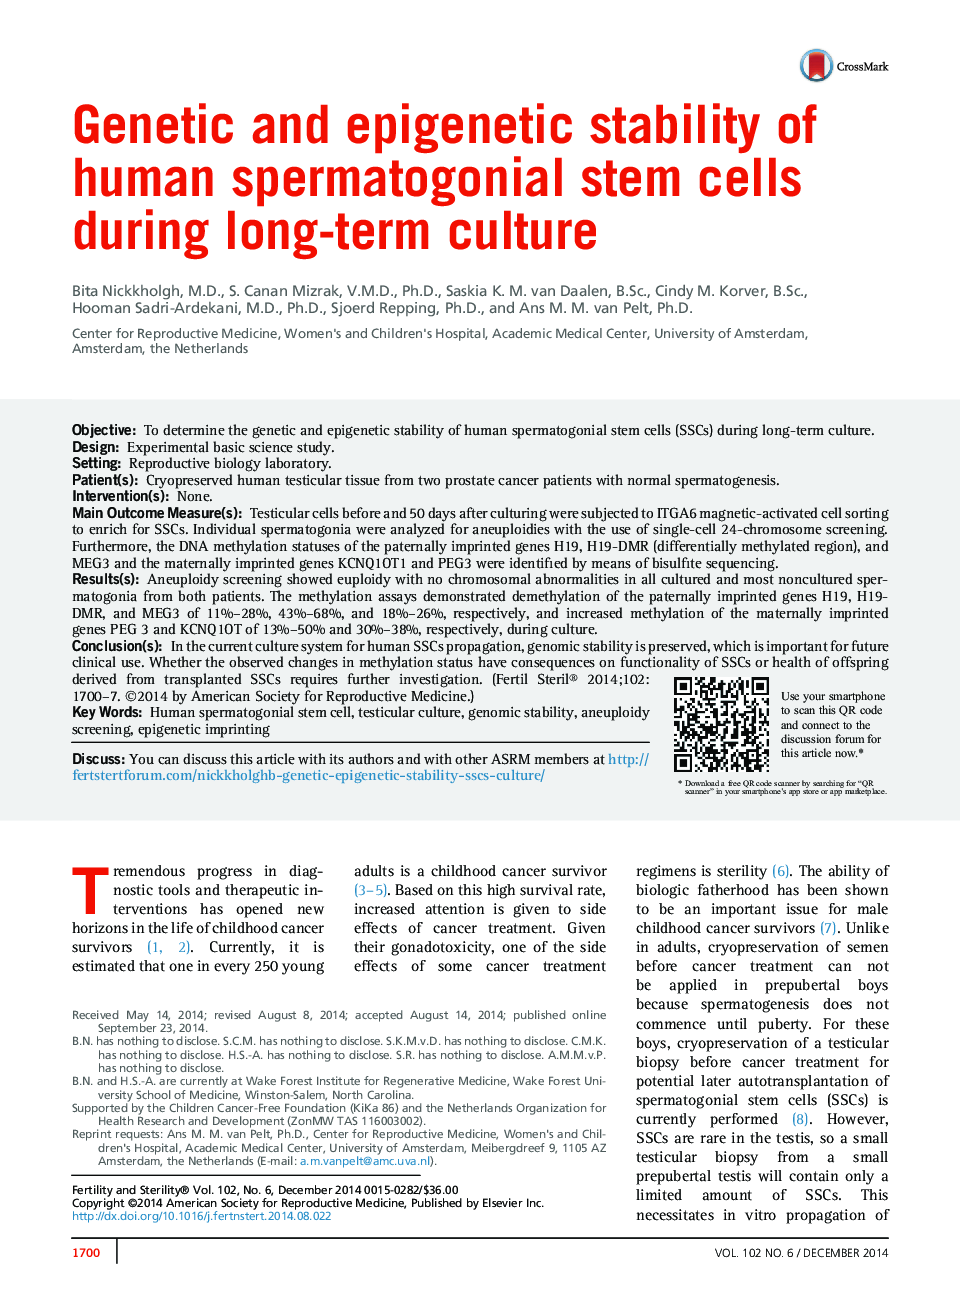 Genetic and epigenetic stability of human spermatogonial stem cells during long-term culture